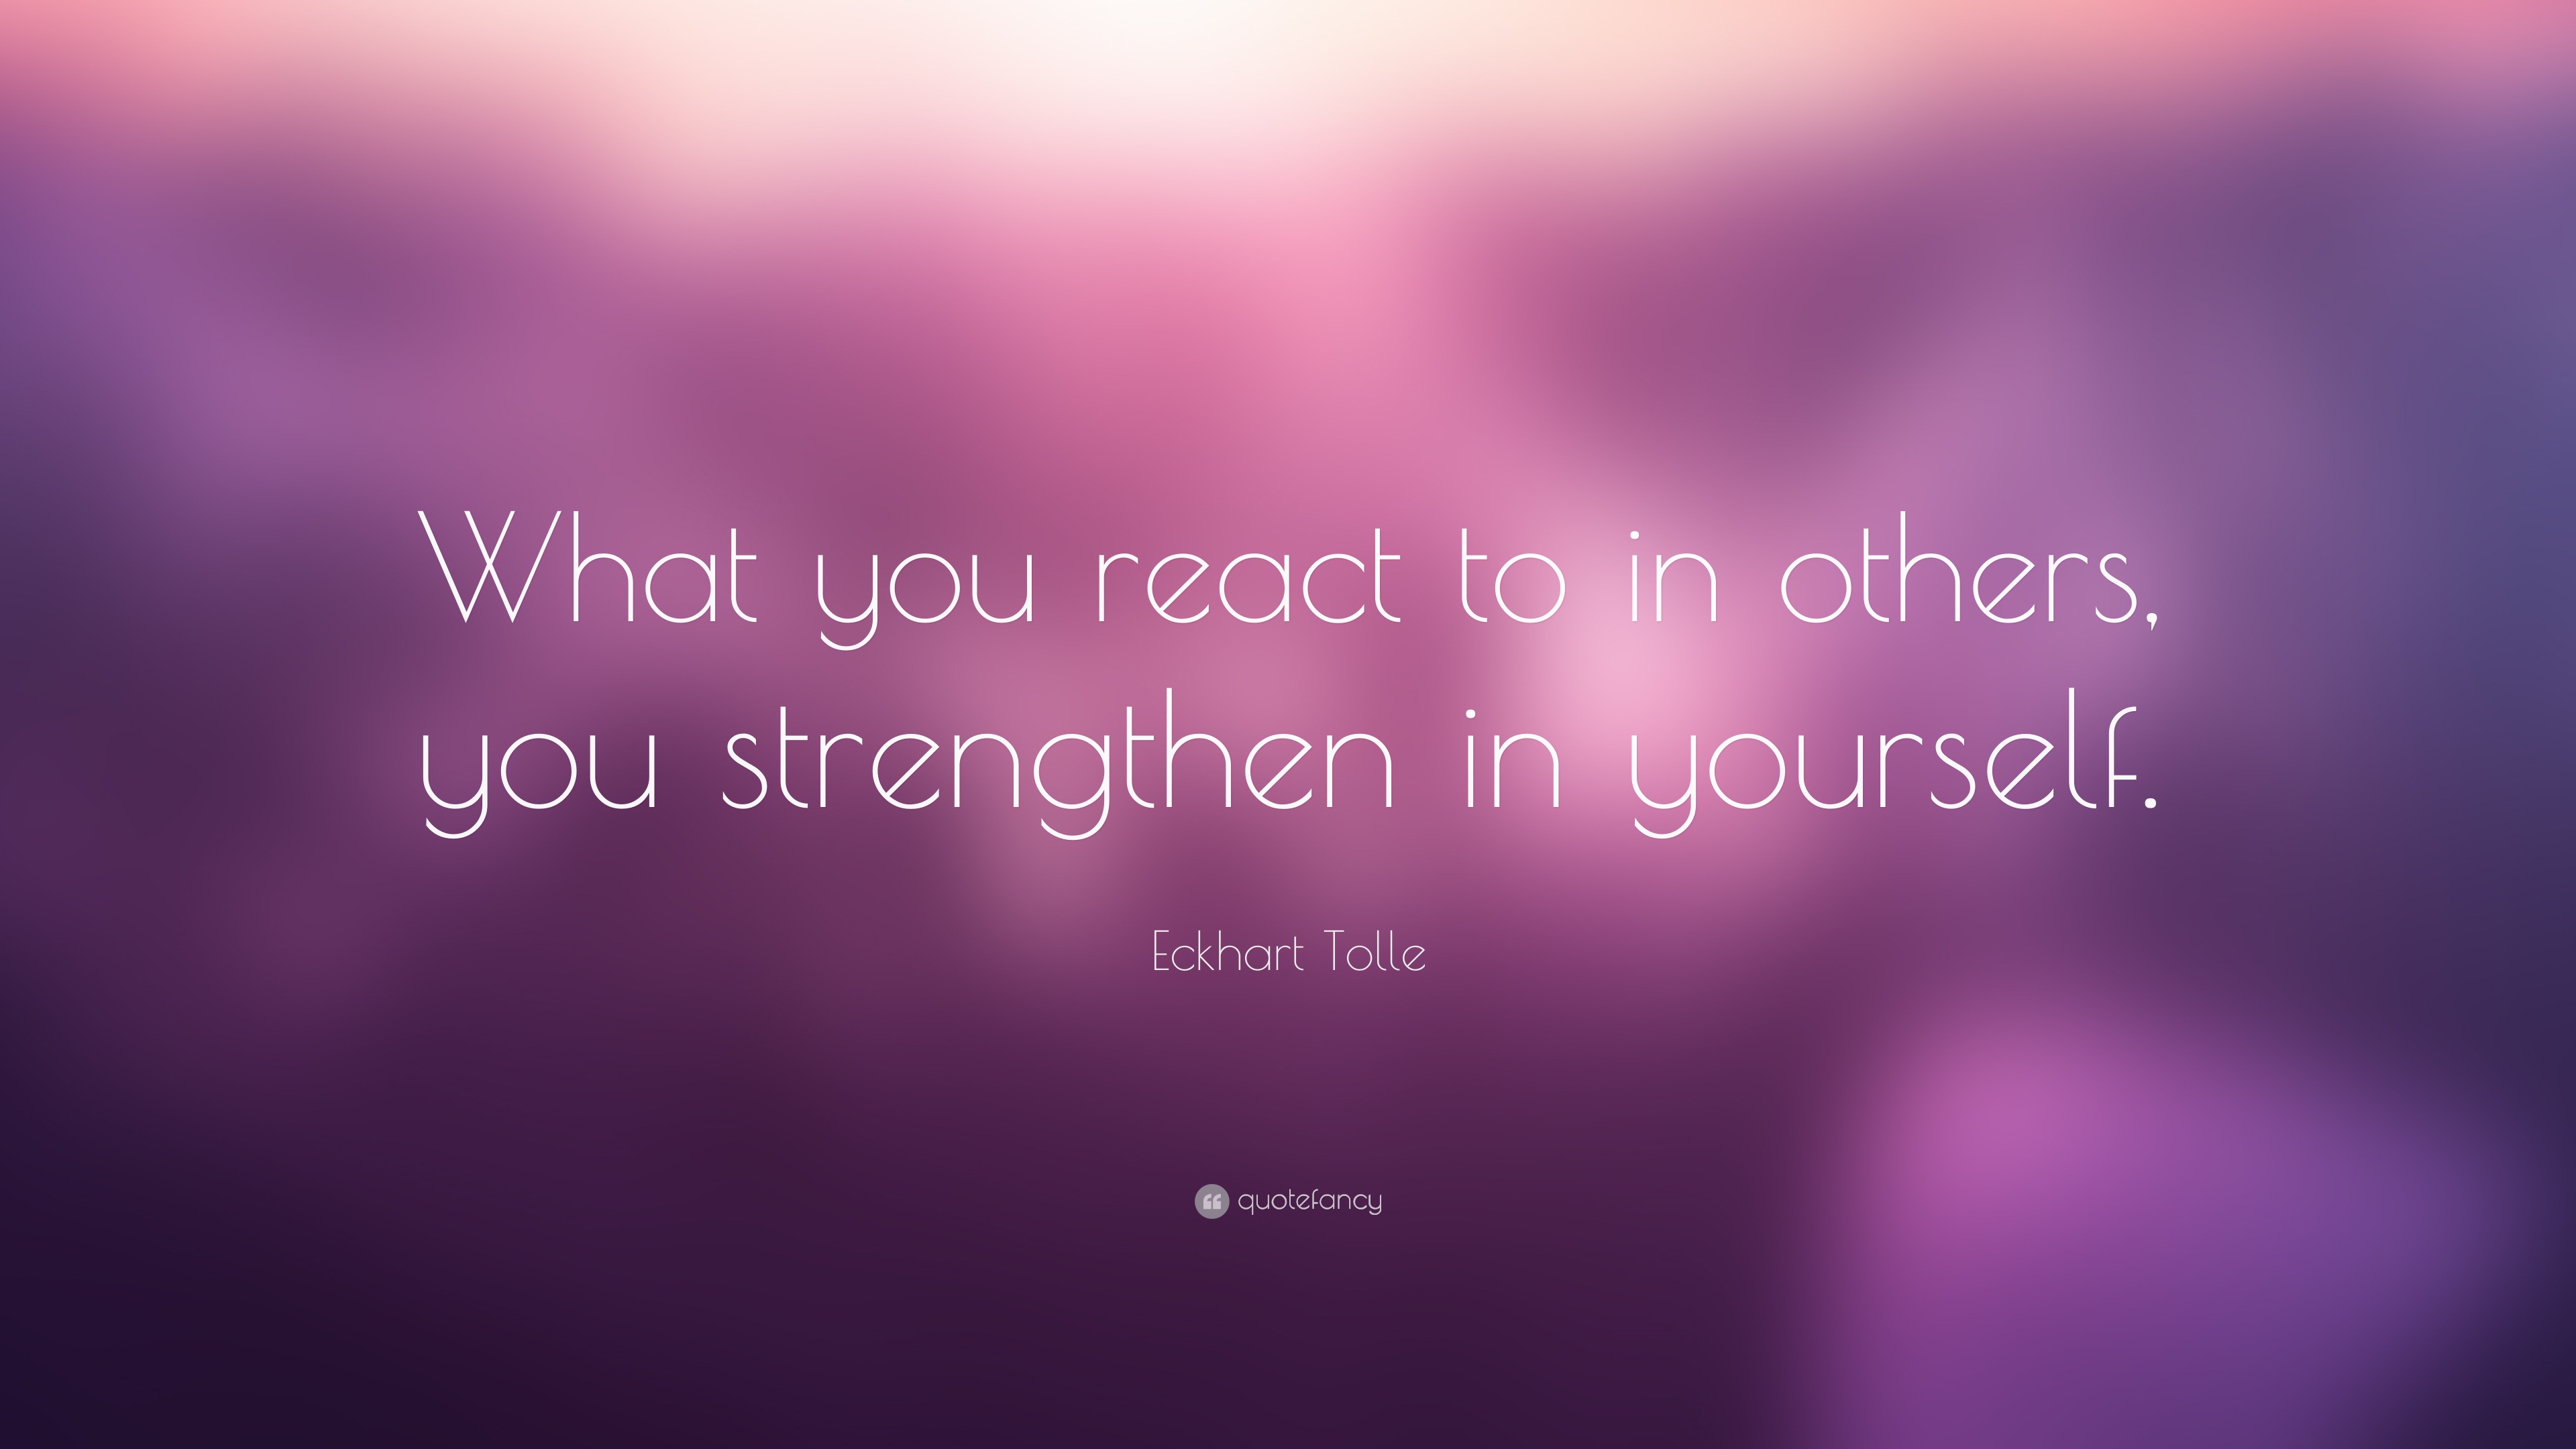 Eckhart Tolle Quote: “What you react to in others, you strengthen in